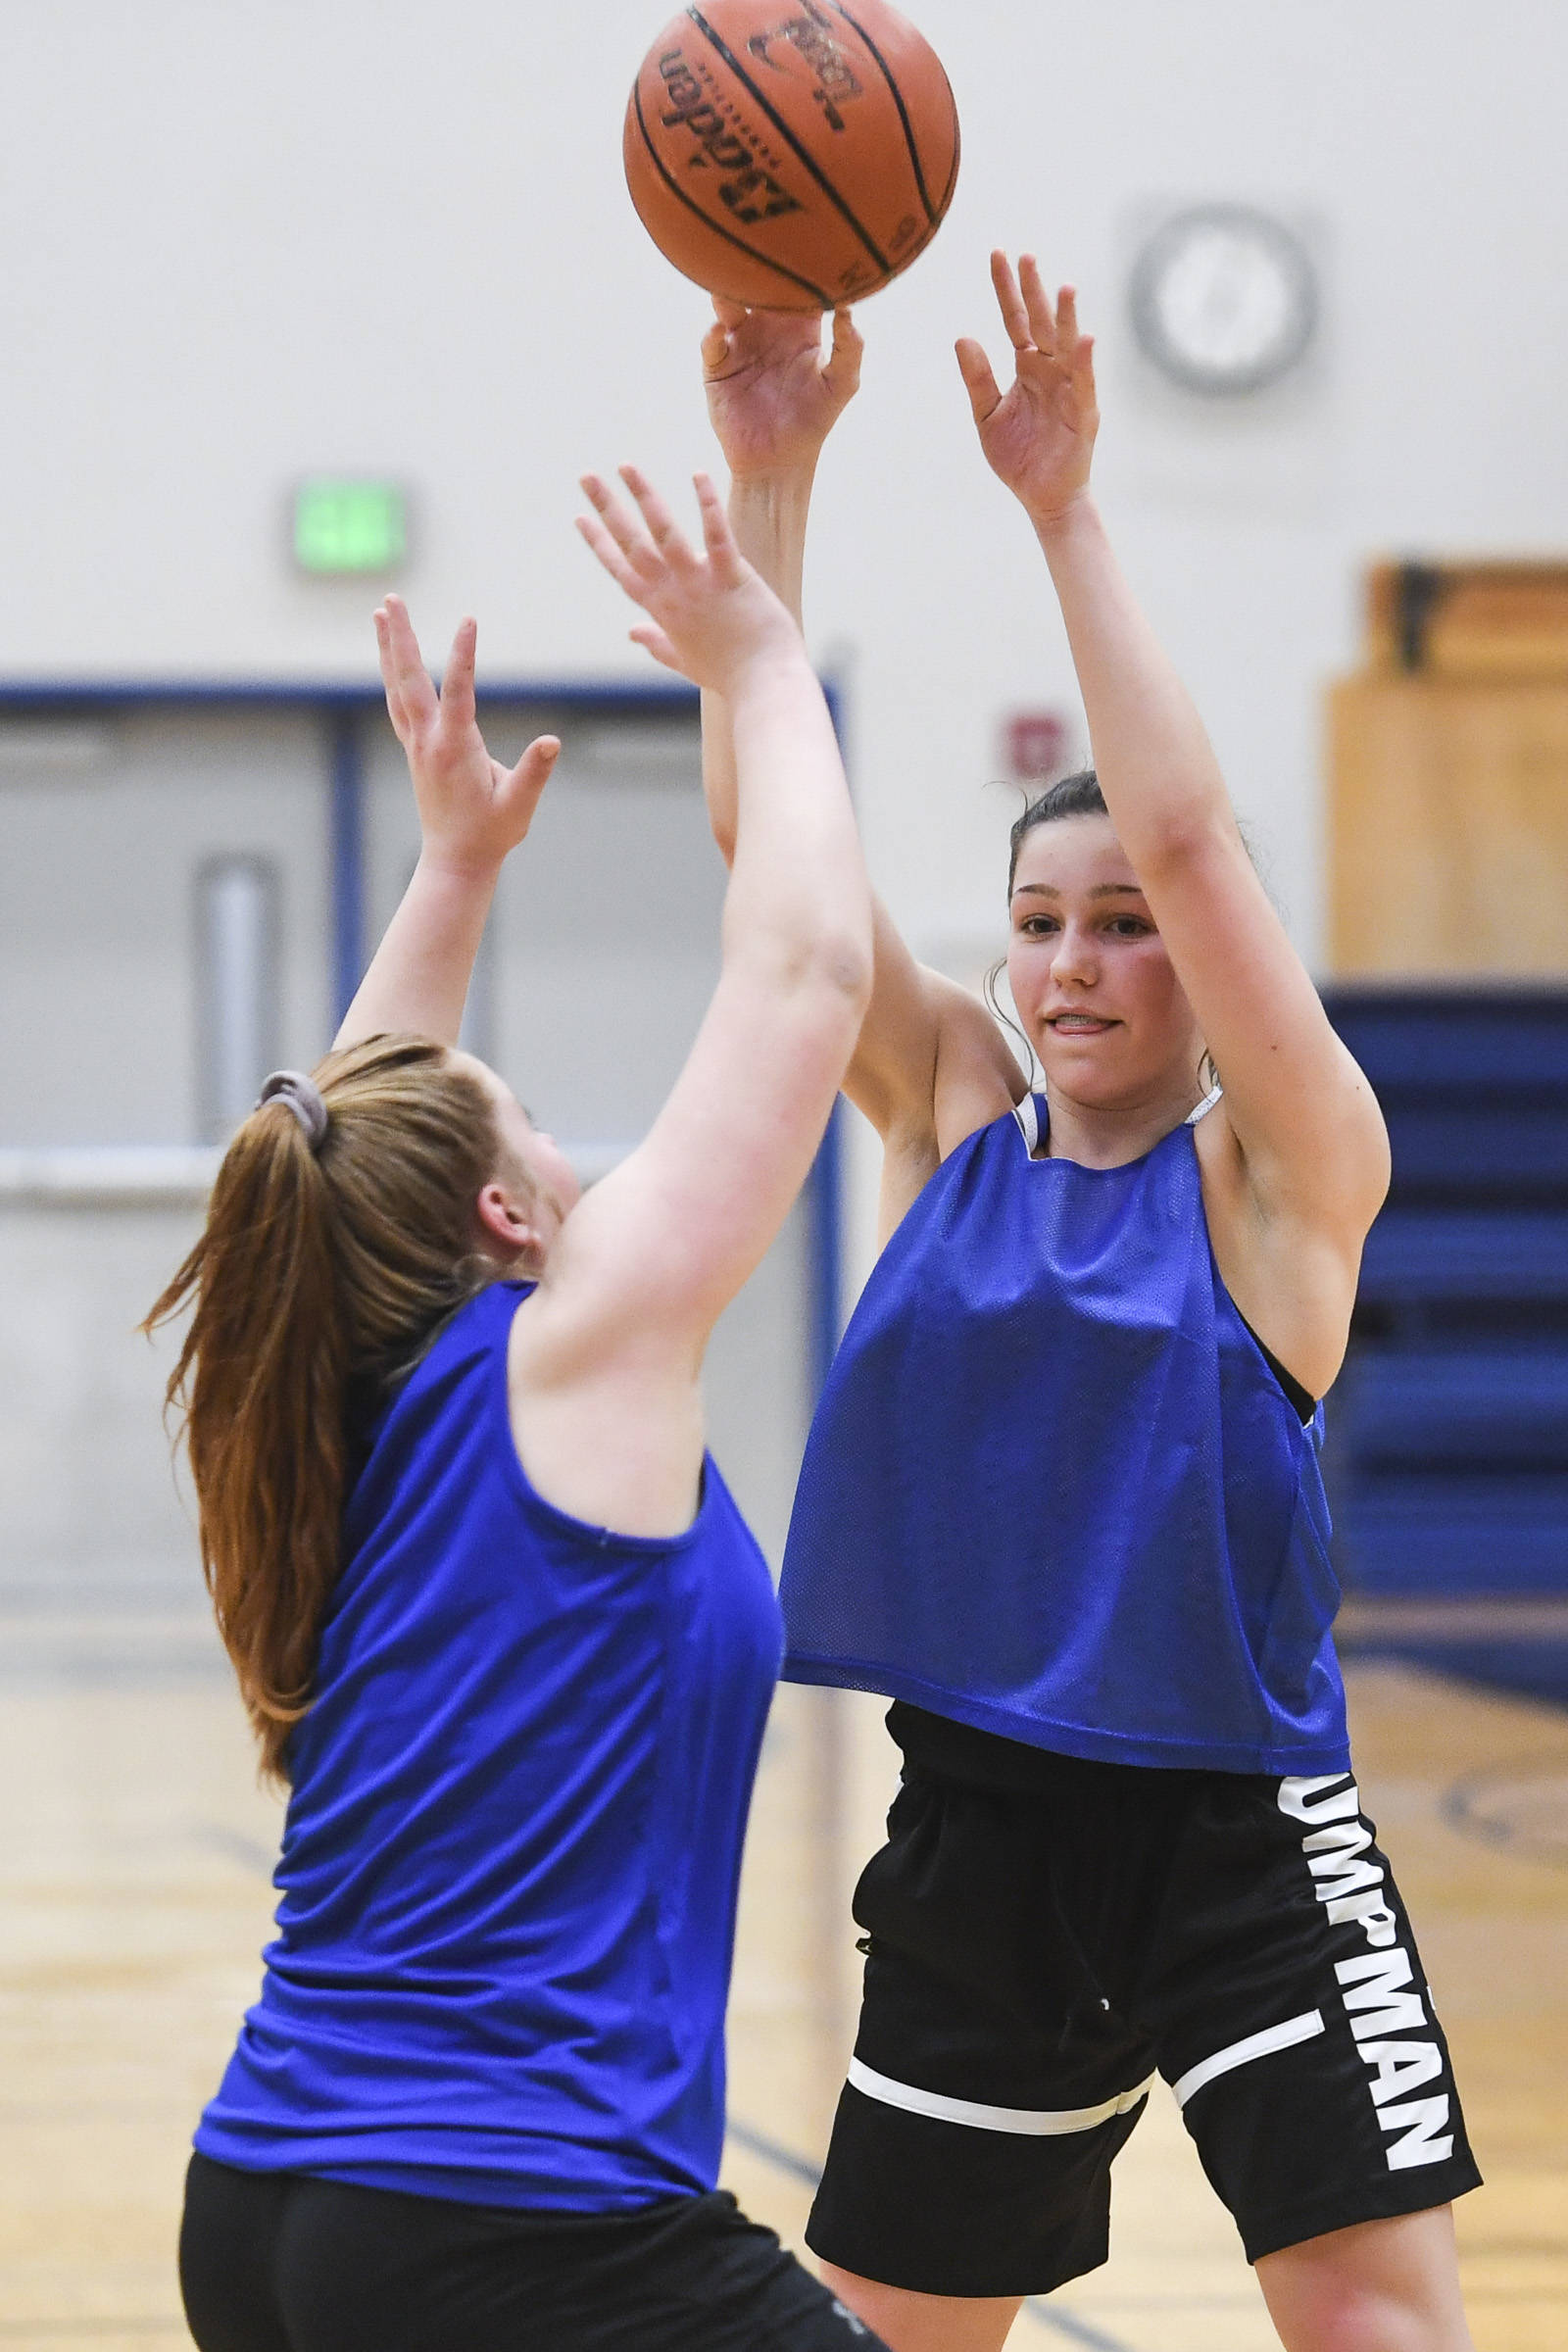 Riley Traxler, right, passes over Sydney Strong during the girls varsity basketball practice at Thunder Mountain High School on Monday, Dec. 9, 2019. (Michael Penn | Juneau Empire)